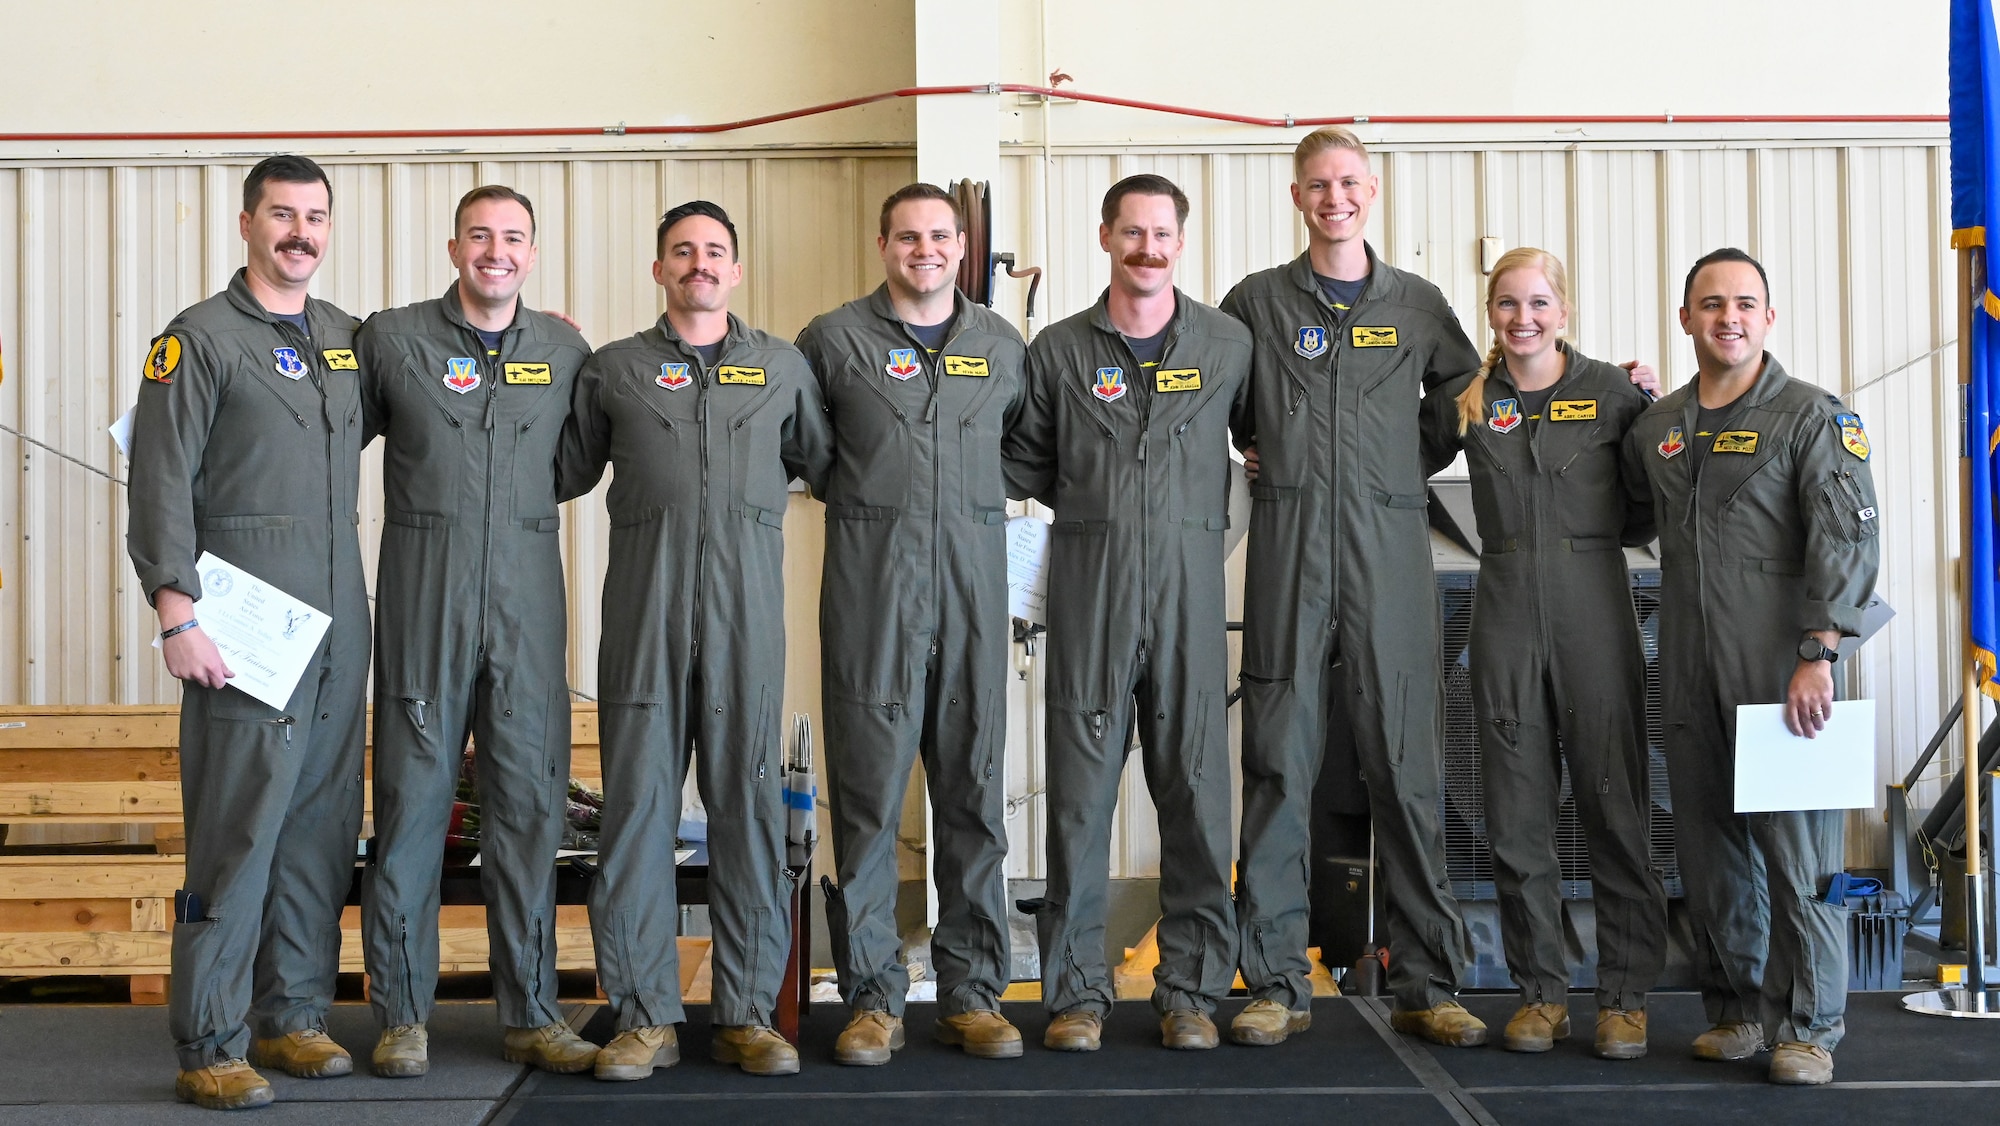 Pictured above is a group of Airmen posing for a photo.